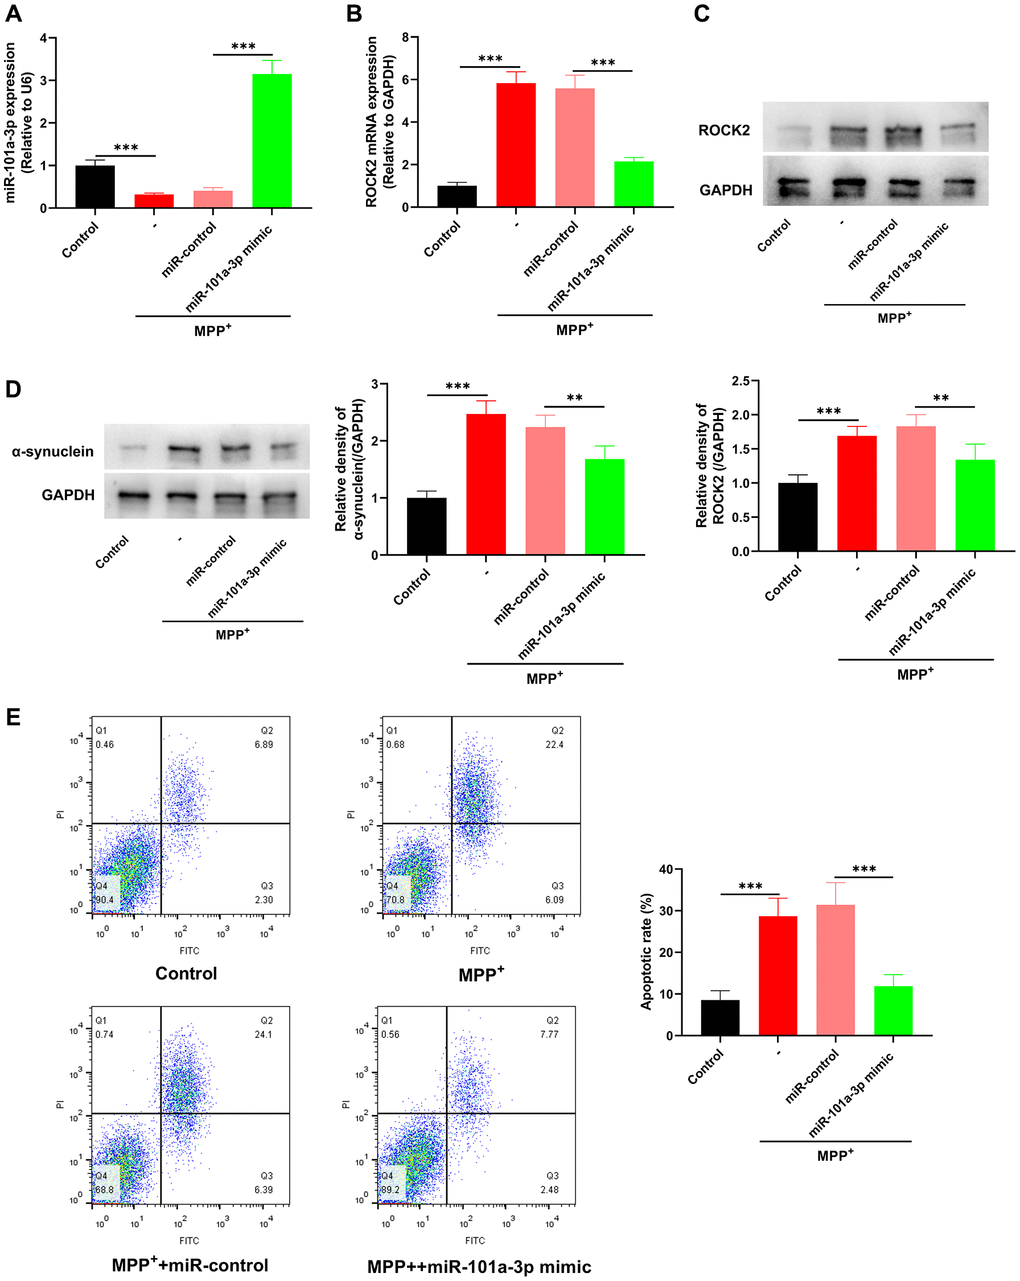 miR-101a-3p mimic inhibits the apoptosis of Neuro-2a cells induced by MPP+. To confirm the role of miR-101a-3p in Neuro-2a cells treated with MPP+, miR-101a-3p was overexpressed in Neuro-2a cells by transfecting miR-101a-3p mimics before Neuro-2a cells were exposed to MPP+. There were 4 groups: control group, MPTP group, MPP++miR-control group, and MPP++miR-101a-3p mimic group. (A) Detection via qRT-PCR of miR-101a-3p expression in each group of cells. (B) Detection of ROCK2 mRNA expression in each group of cells via qRT-PCR. (C) Western blot detection of ROCK2 protein expression level in each group of cells. (D) Western blot was utilized to detect α-synuclein protein expression in each group of cells. (E) Flow cytometry was utilized to detect the apoptosis level of Neuro-2a cells in each group. **P ***P 